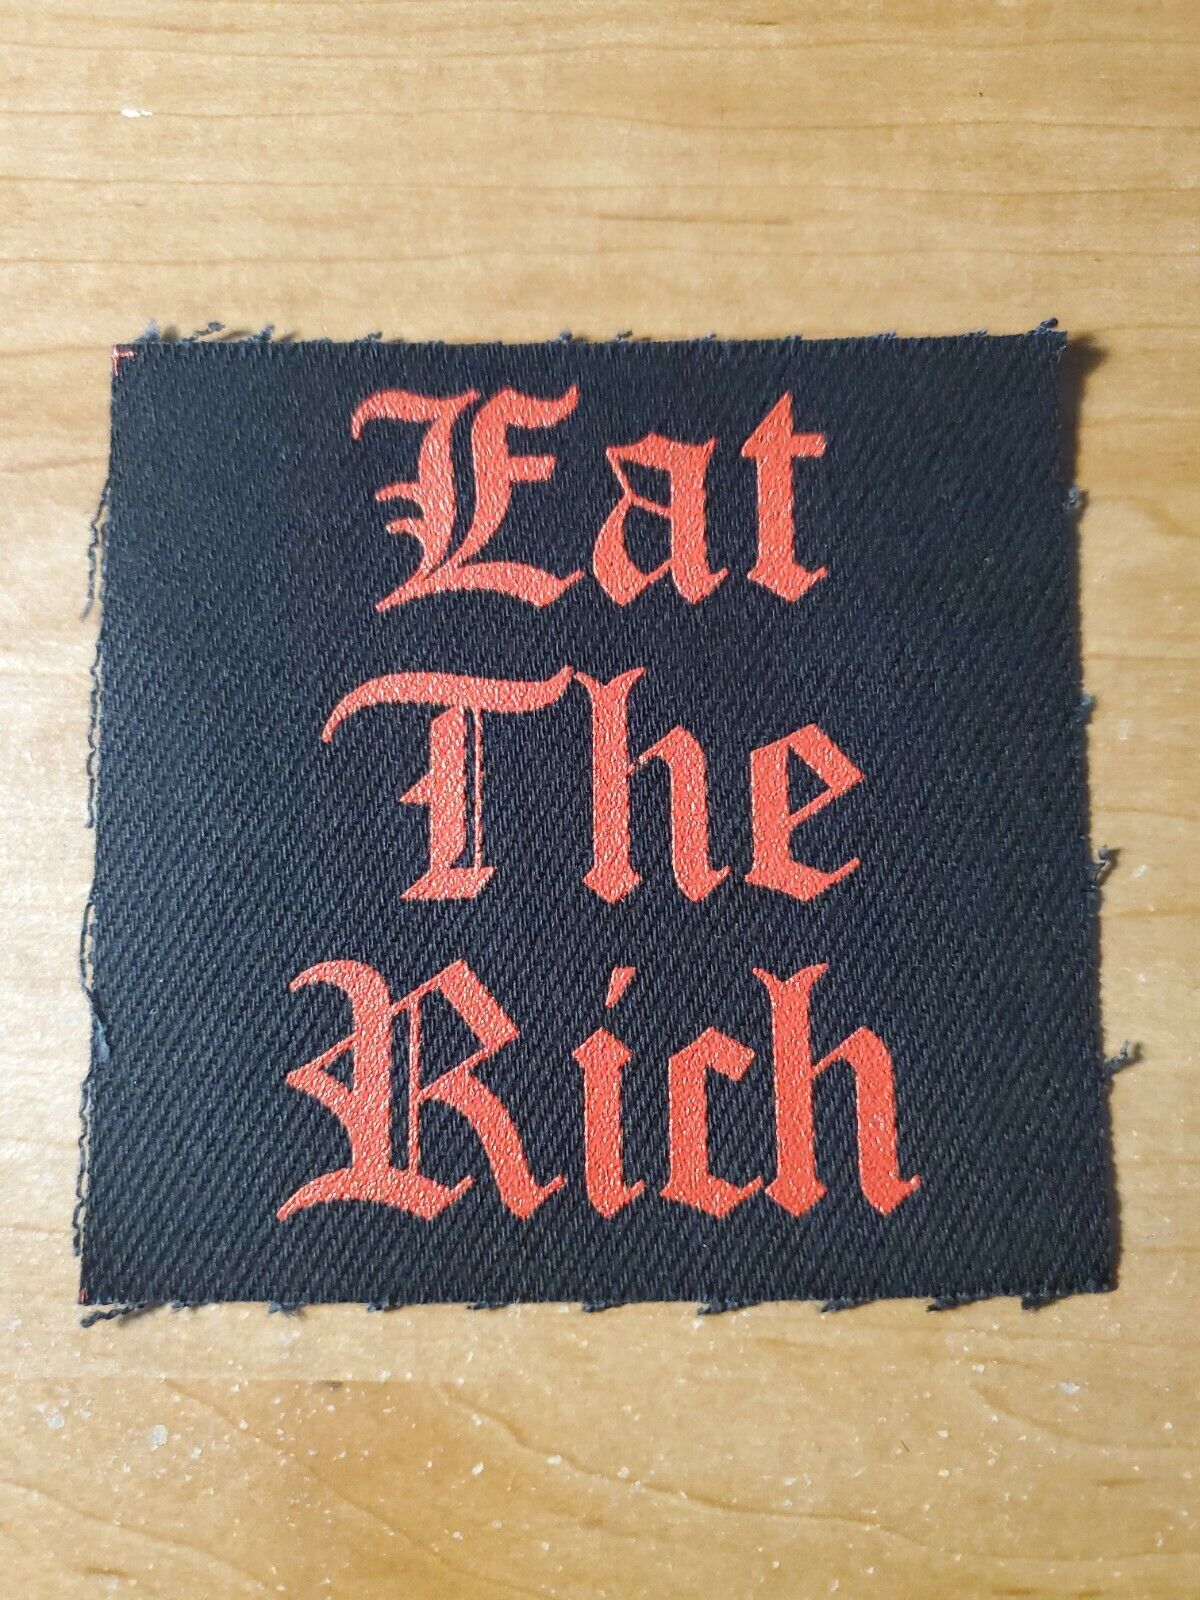 EAT THE RICH Anarchist Canvas CLOTH Jacket PATCH Sew-on/Pin-on Big Tech Punk